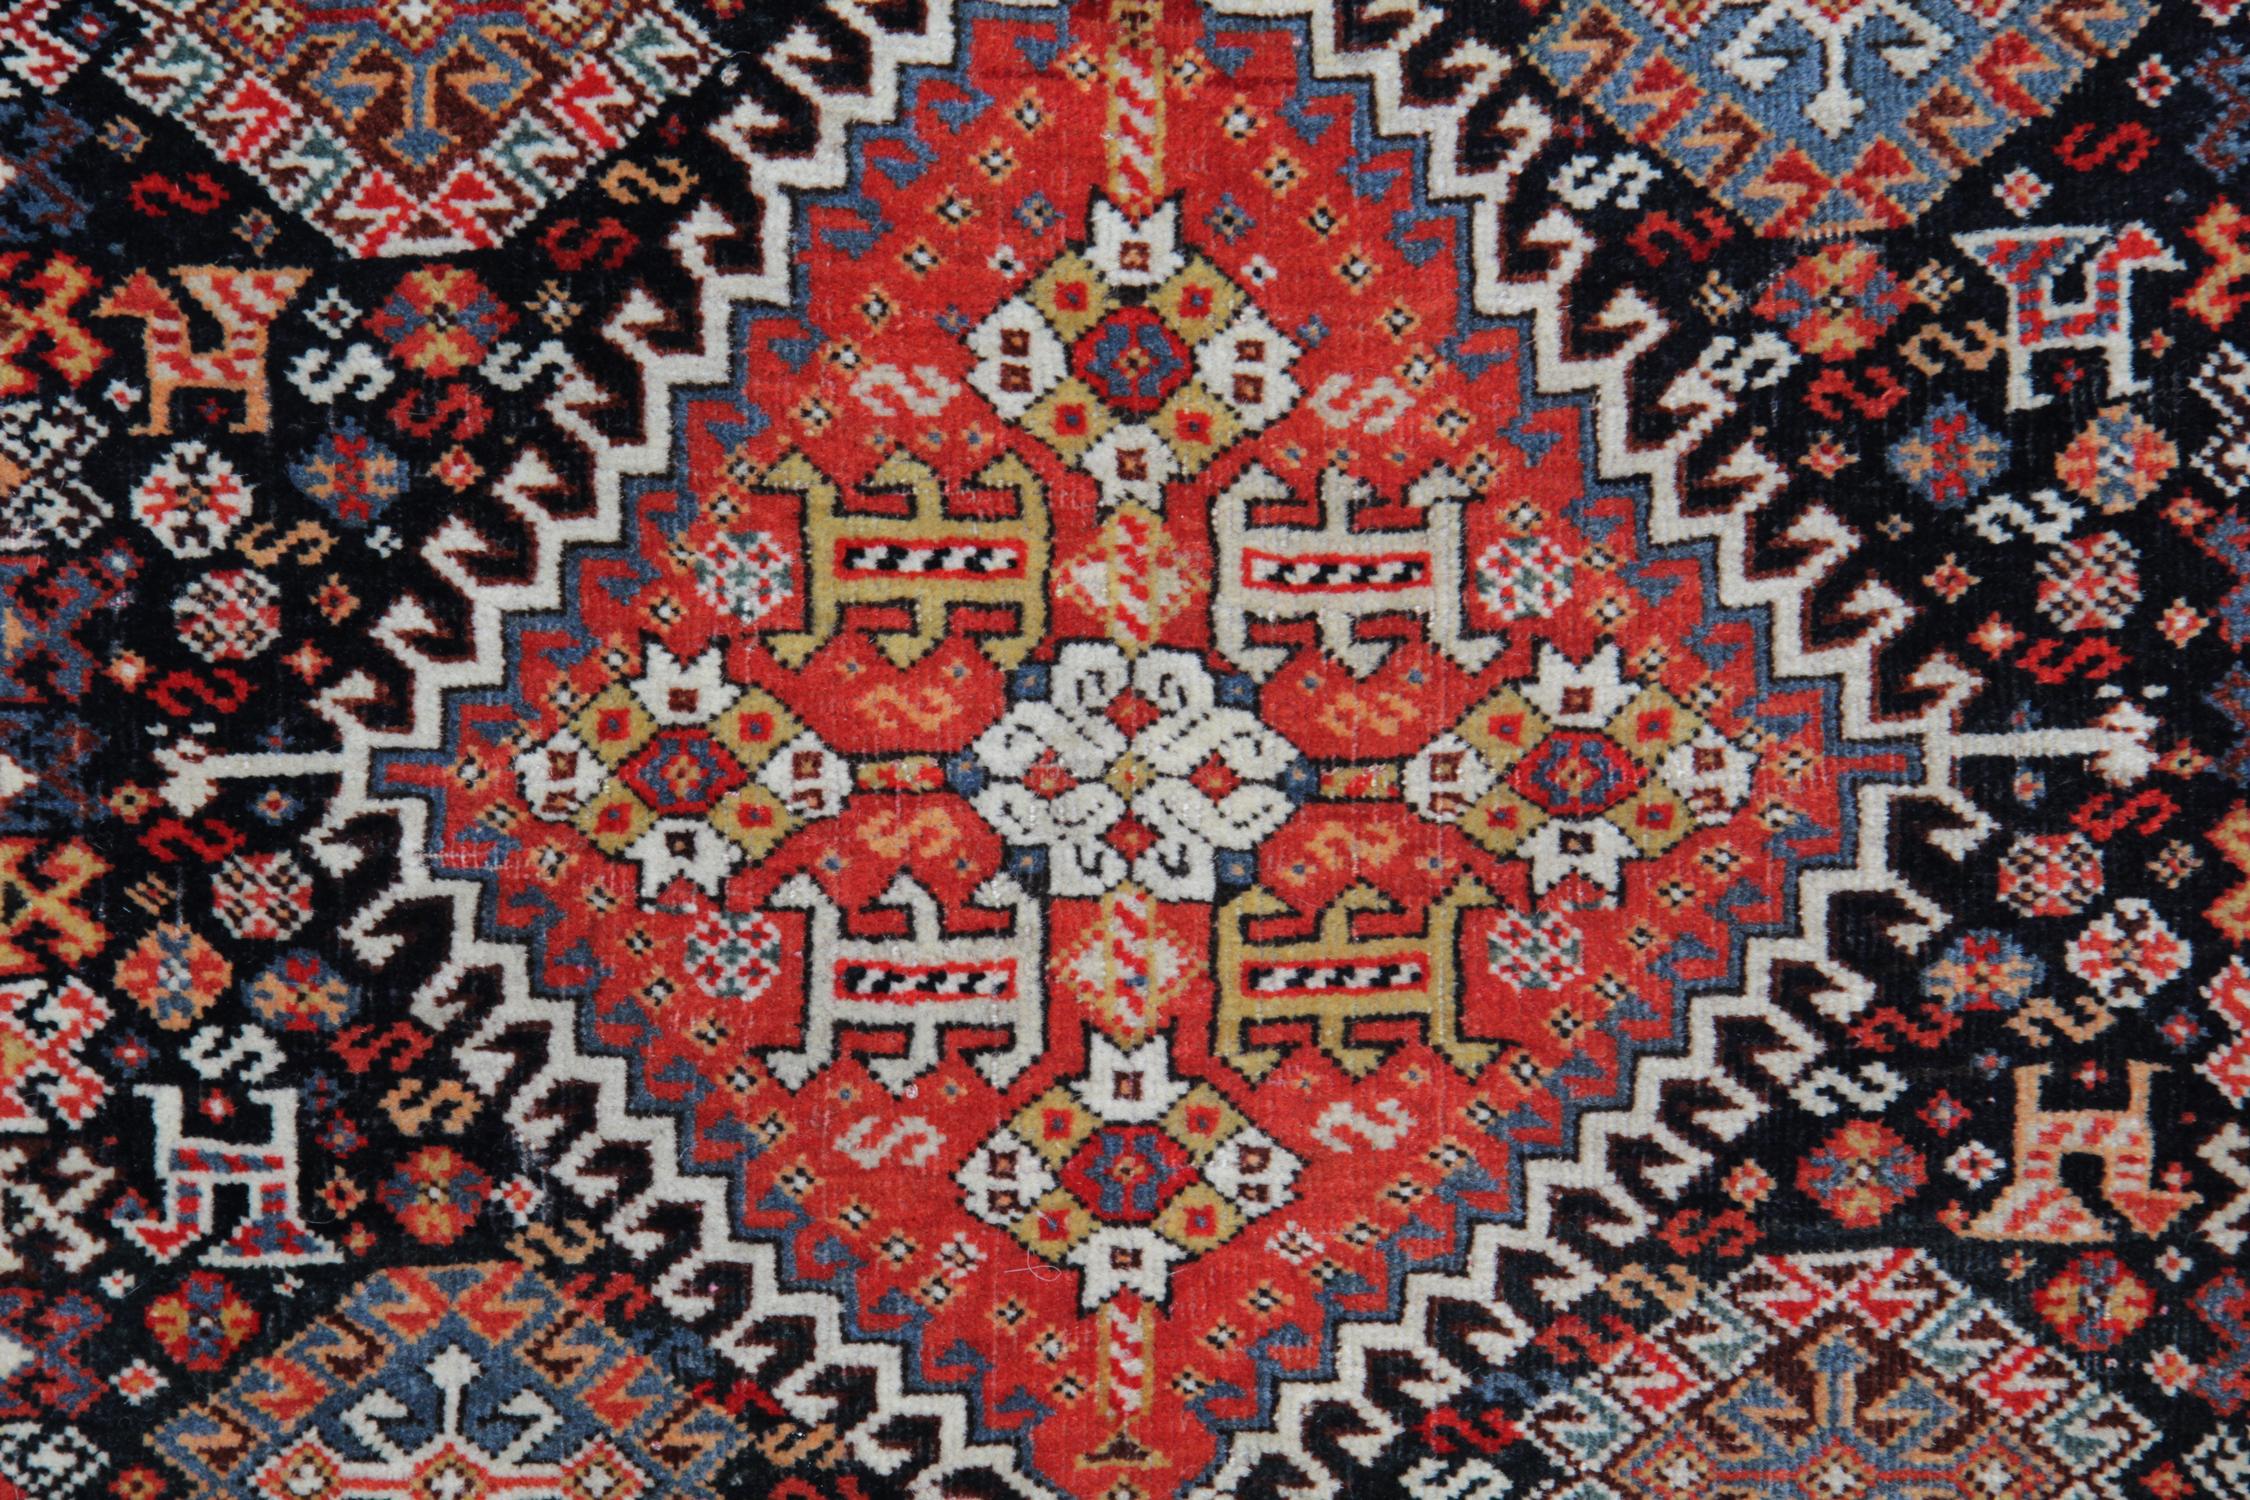 This beautiful rug is a great example of rugs woven in the 1880s. It features a red field with a unique central medallion, the diamond is then surrounded by smaller motifs and animal figures woven on a contrasting black background in accents of red,